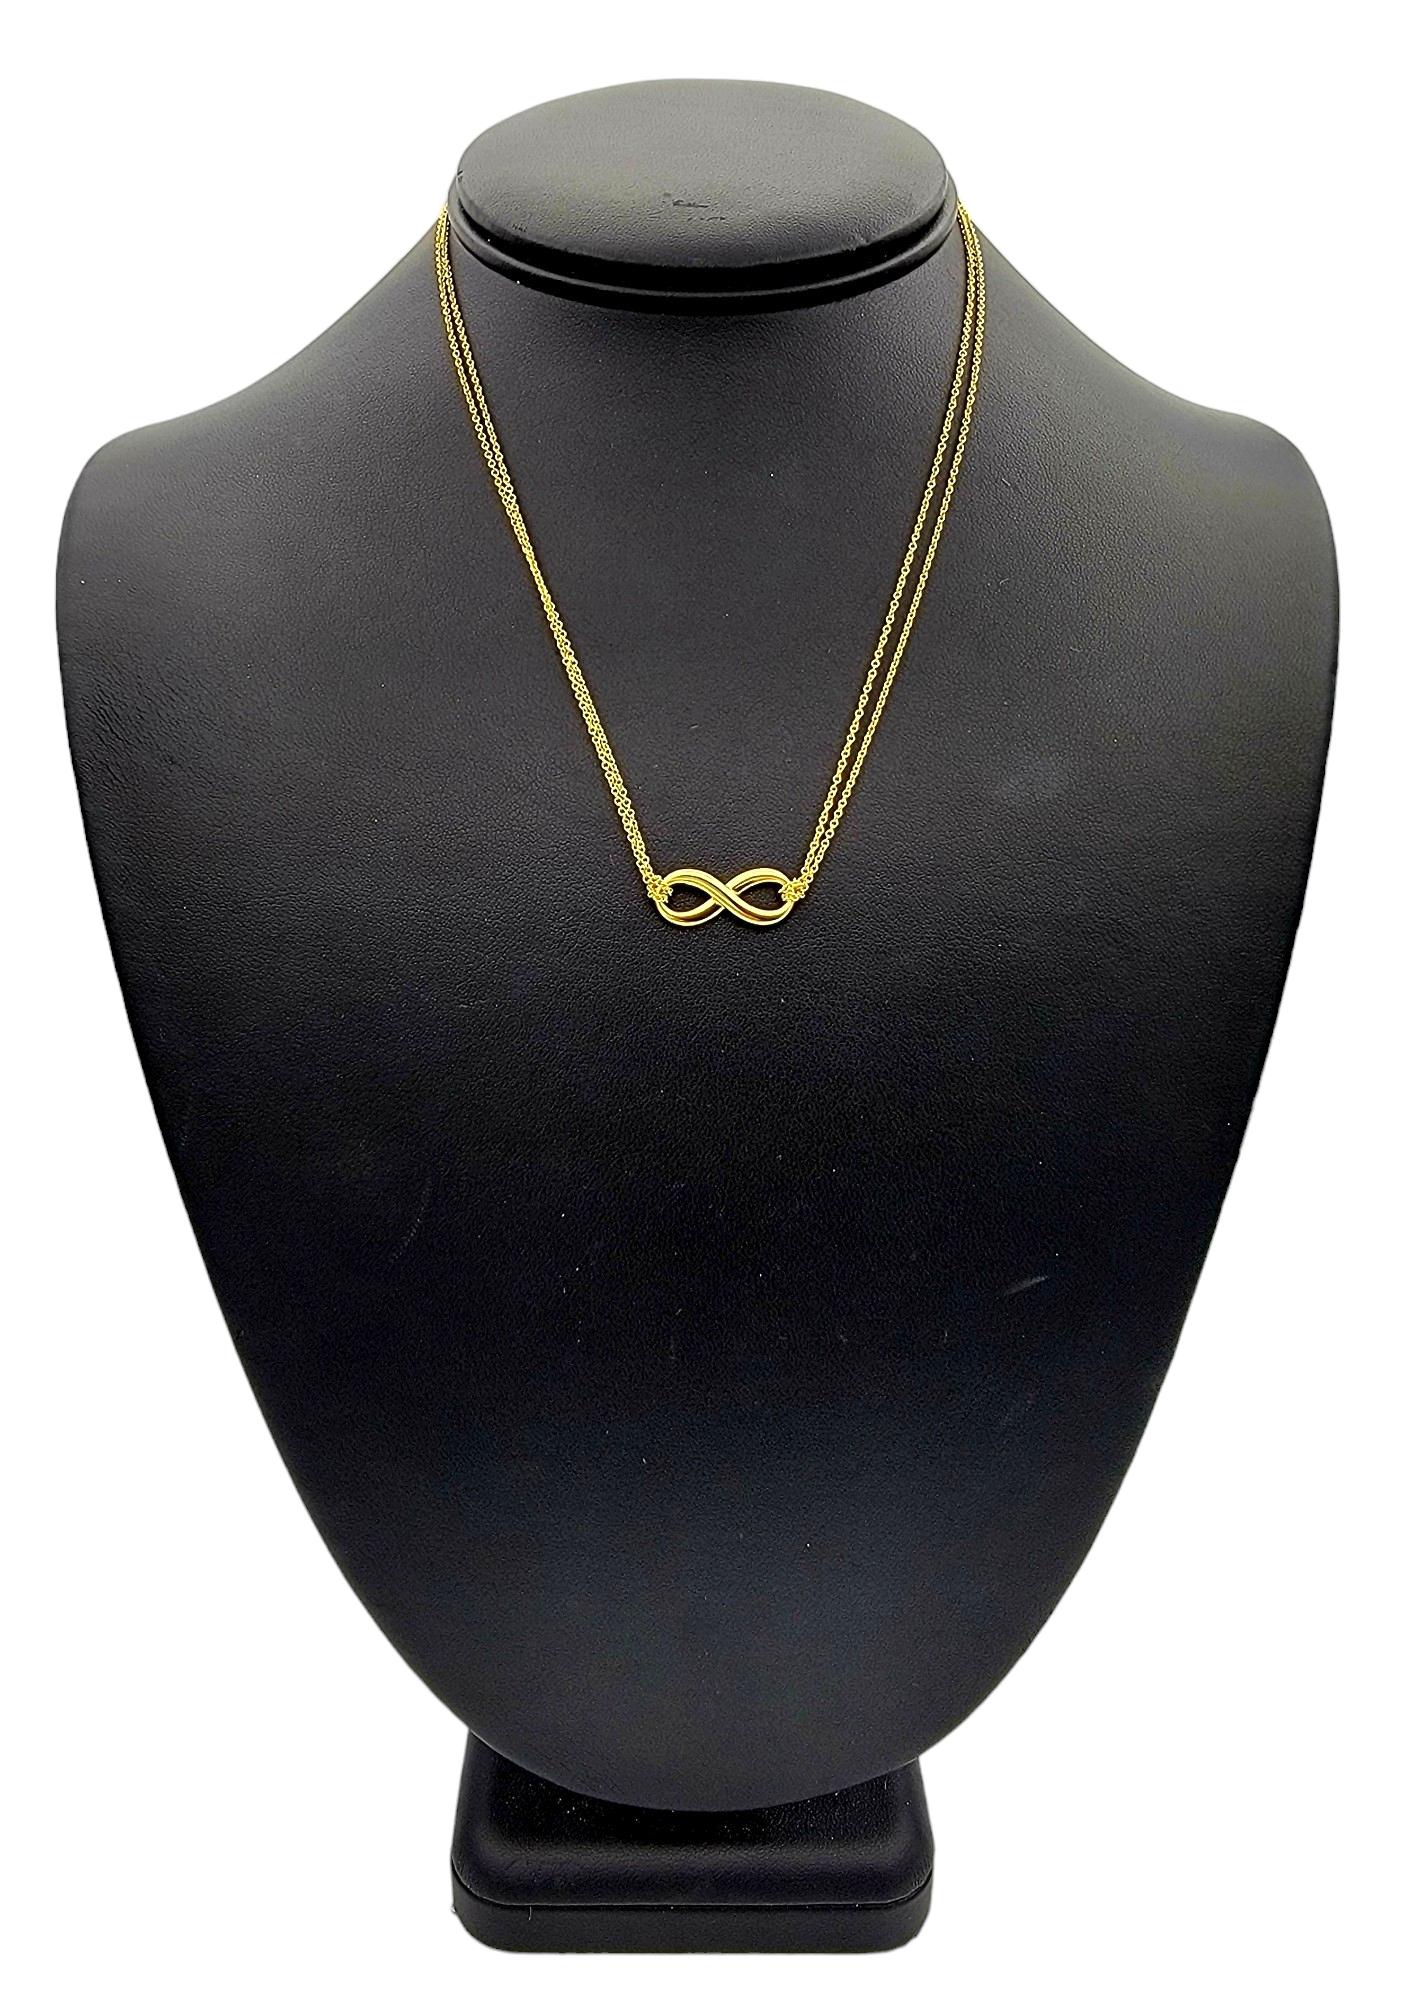 Tiffany & Co. Double Chain Infinity Pendant Necklace Set in 18 Karat Yellow Gold For Sale 1